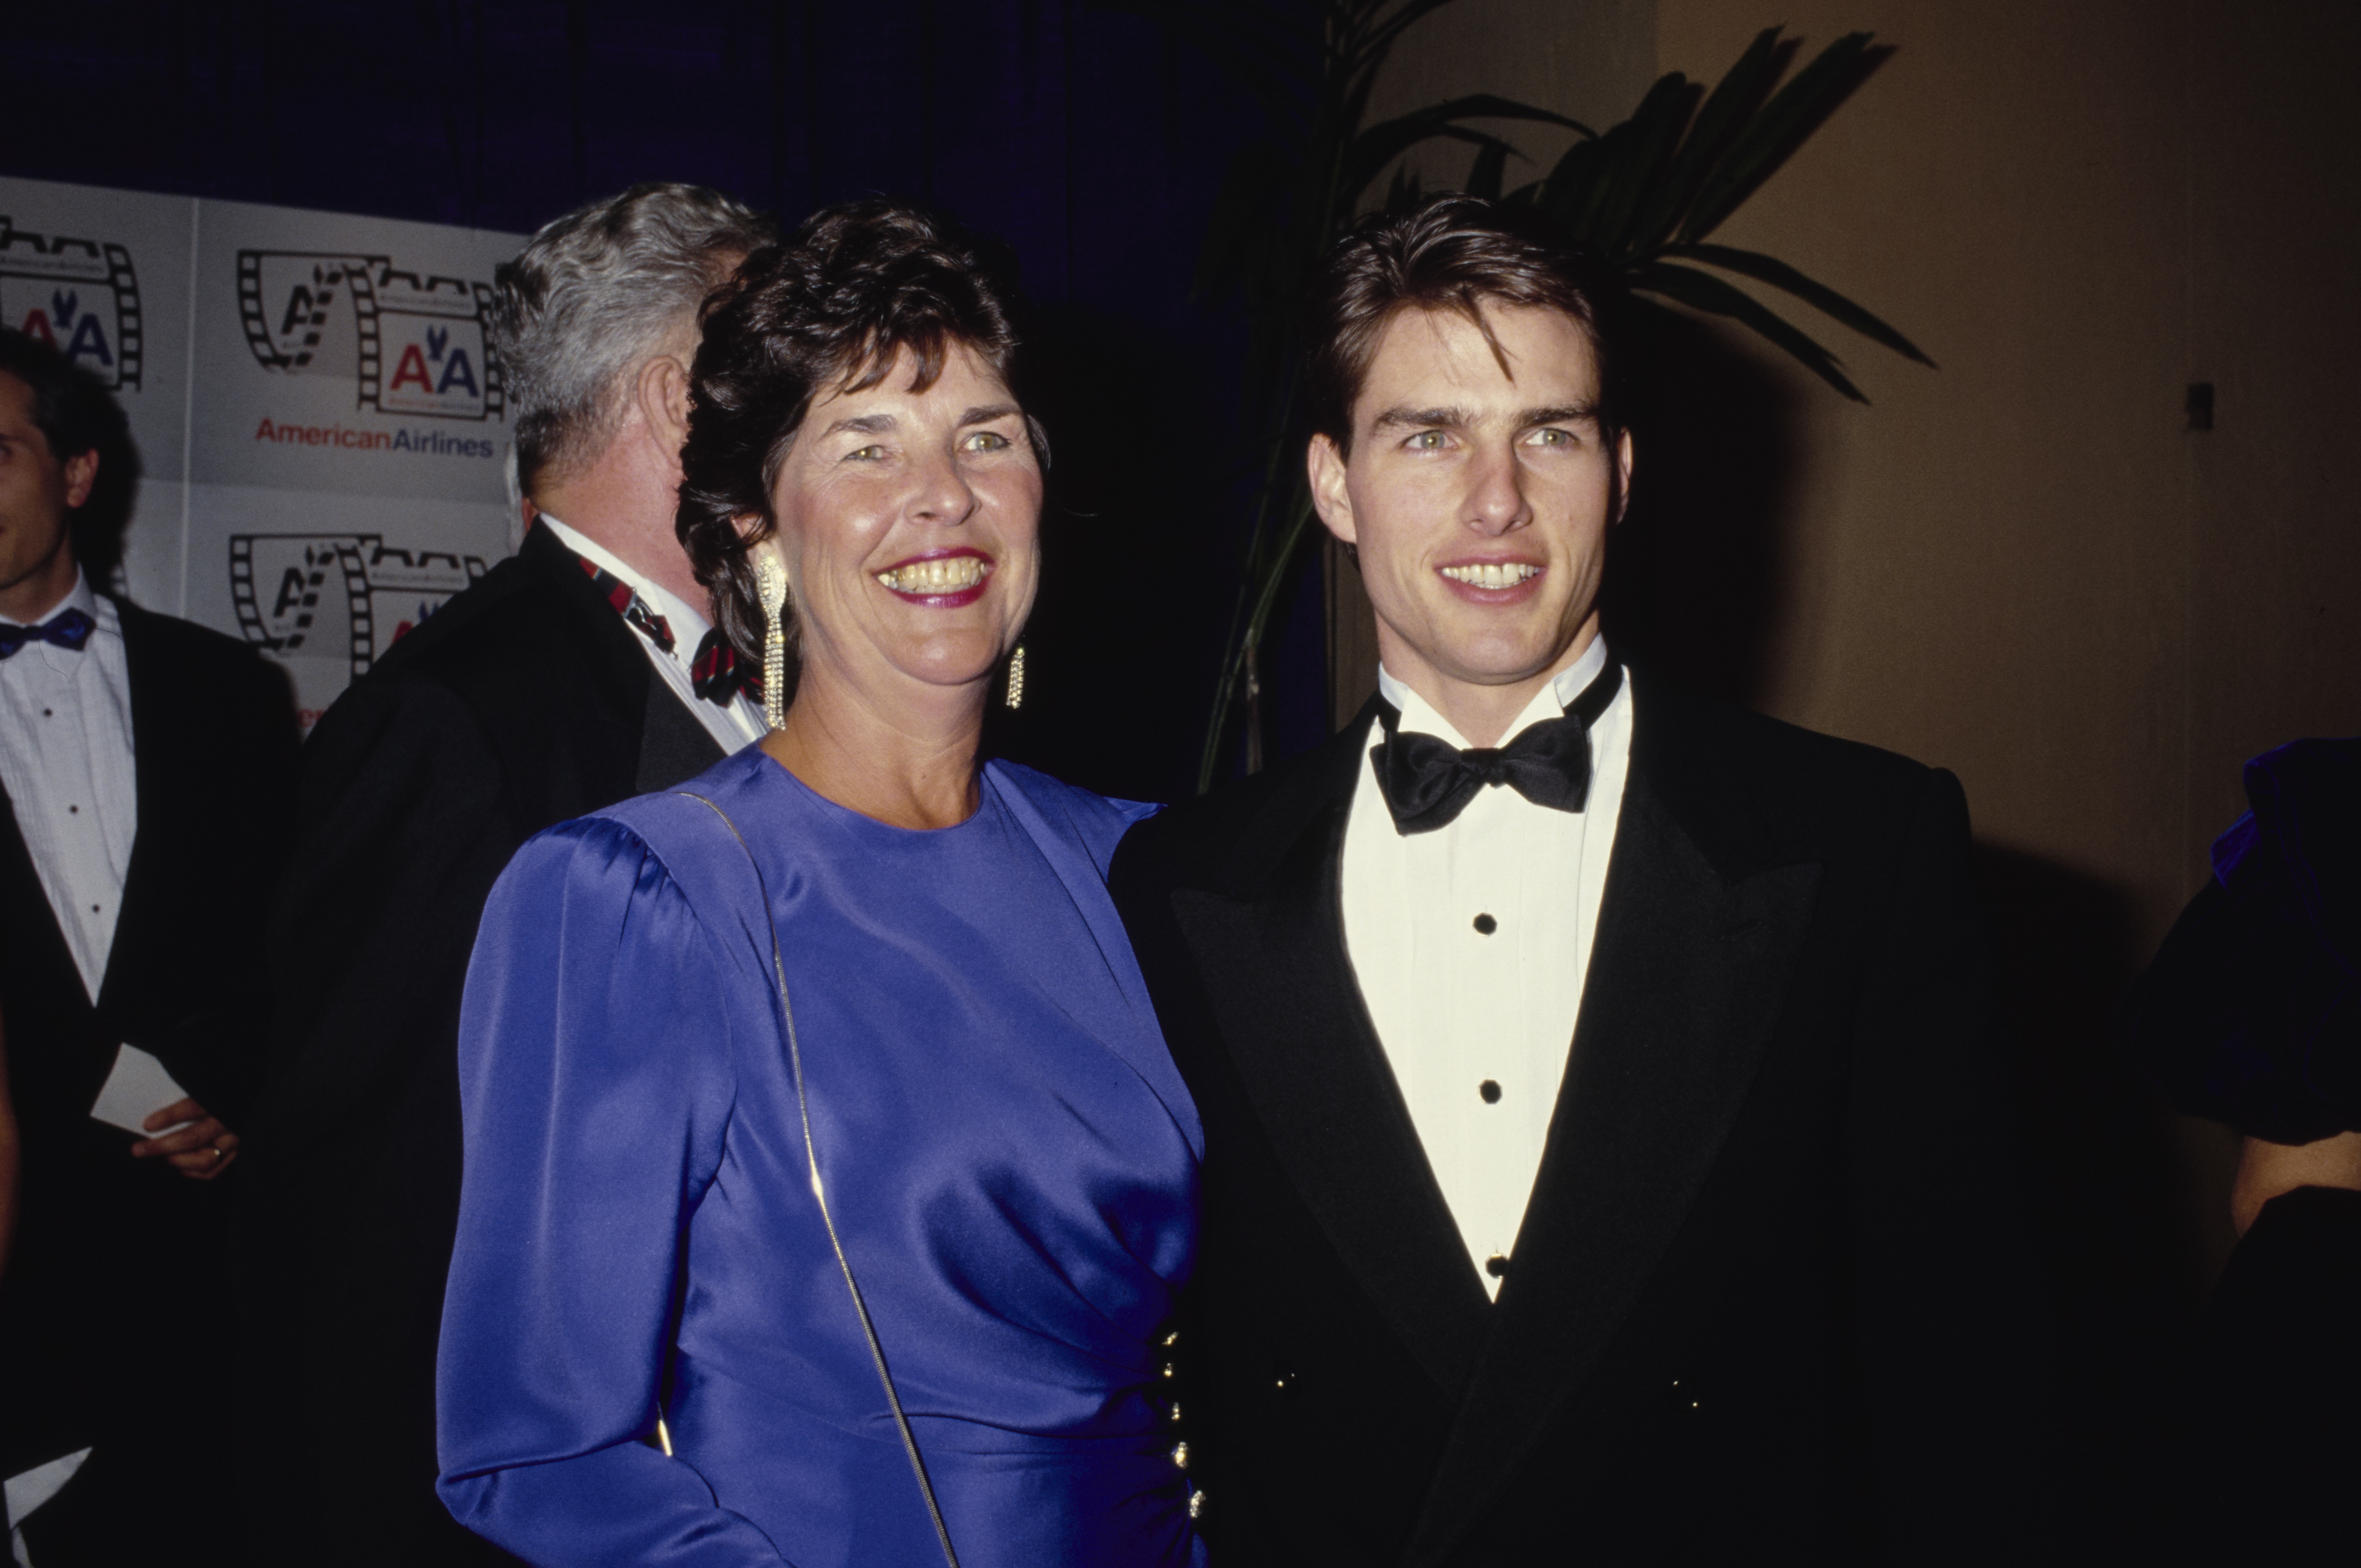 Mary Lee Pfeiffer and Tom Cruise at the 8th Annual American Cinema Awards in Beverly Hills, 1991 | Source: Getty Images